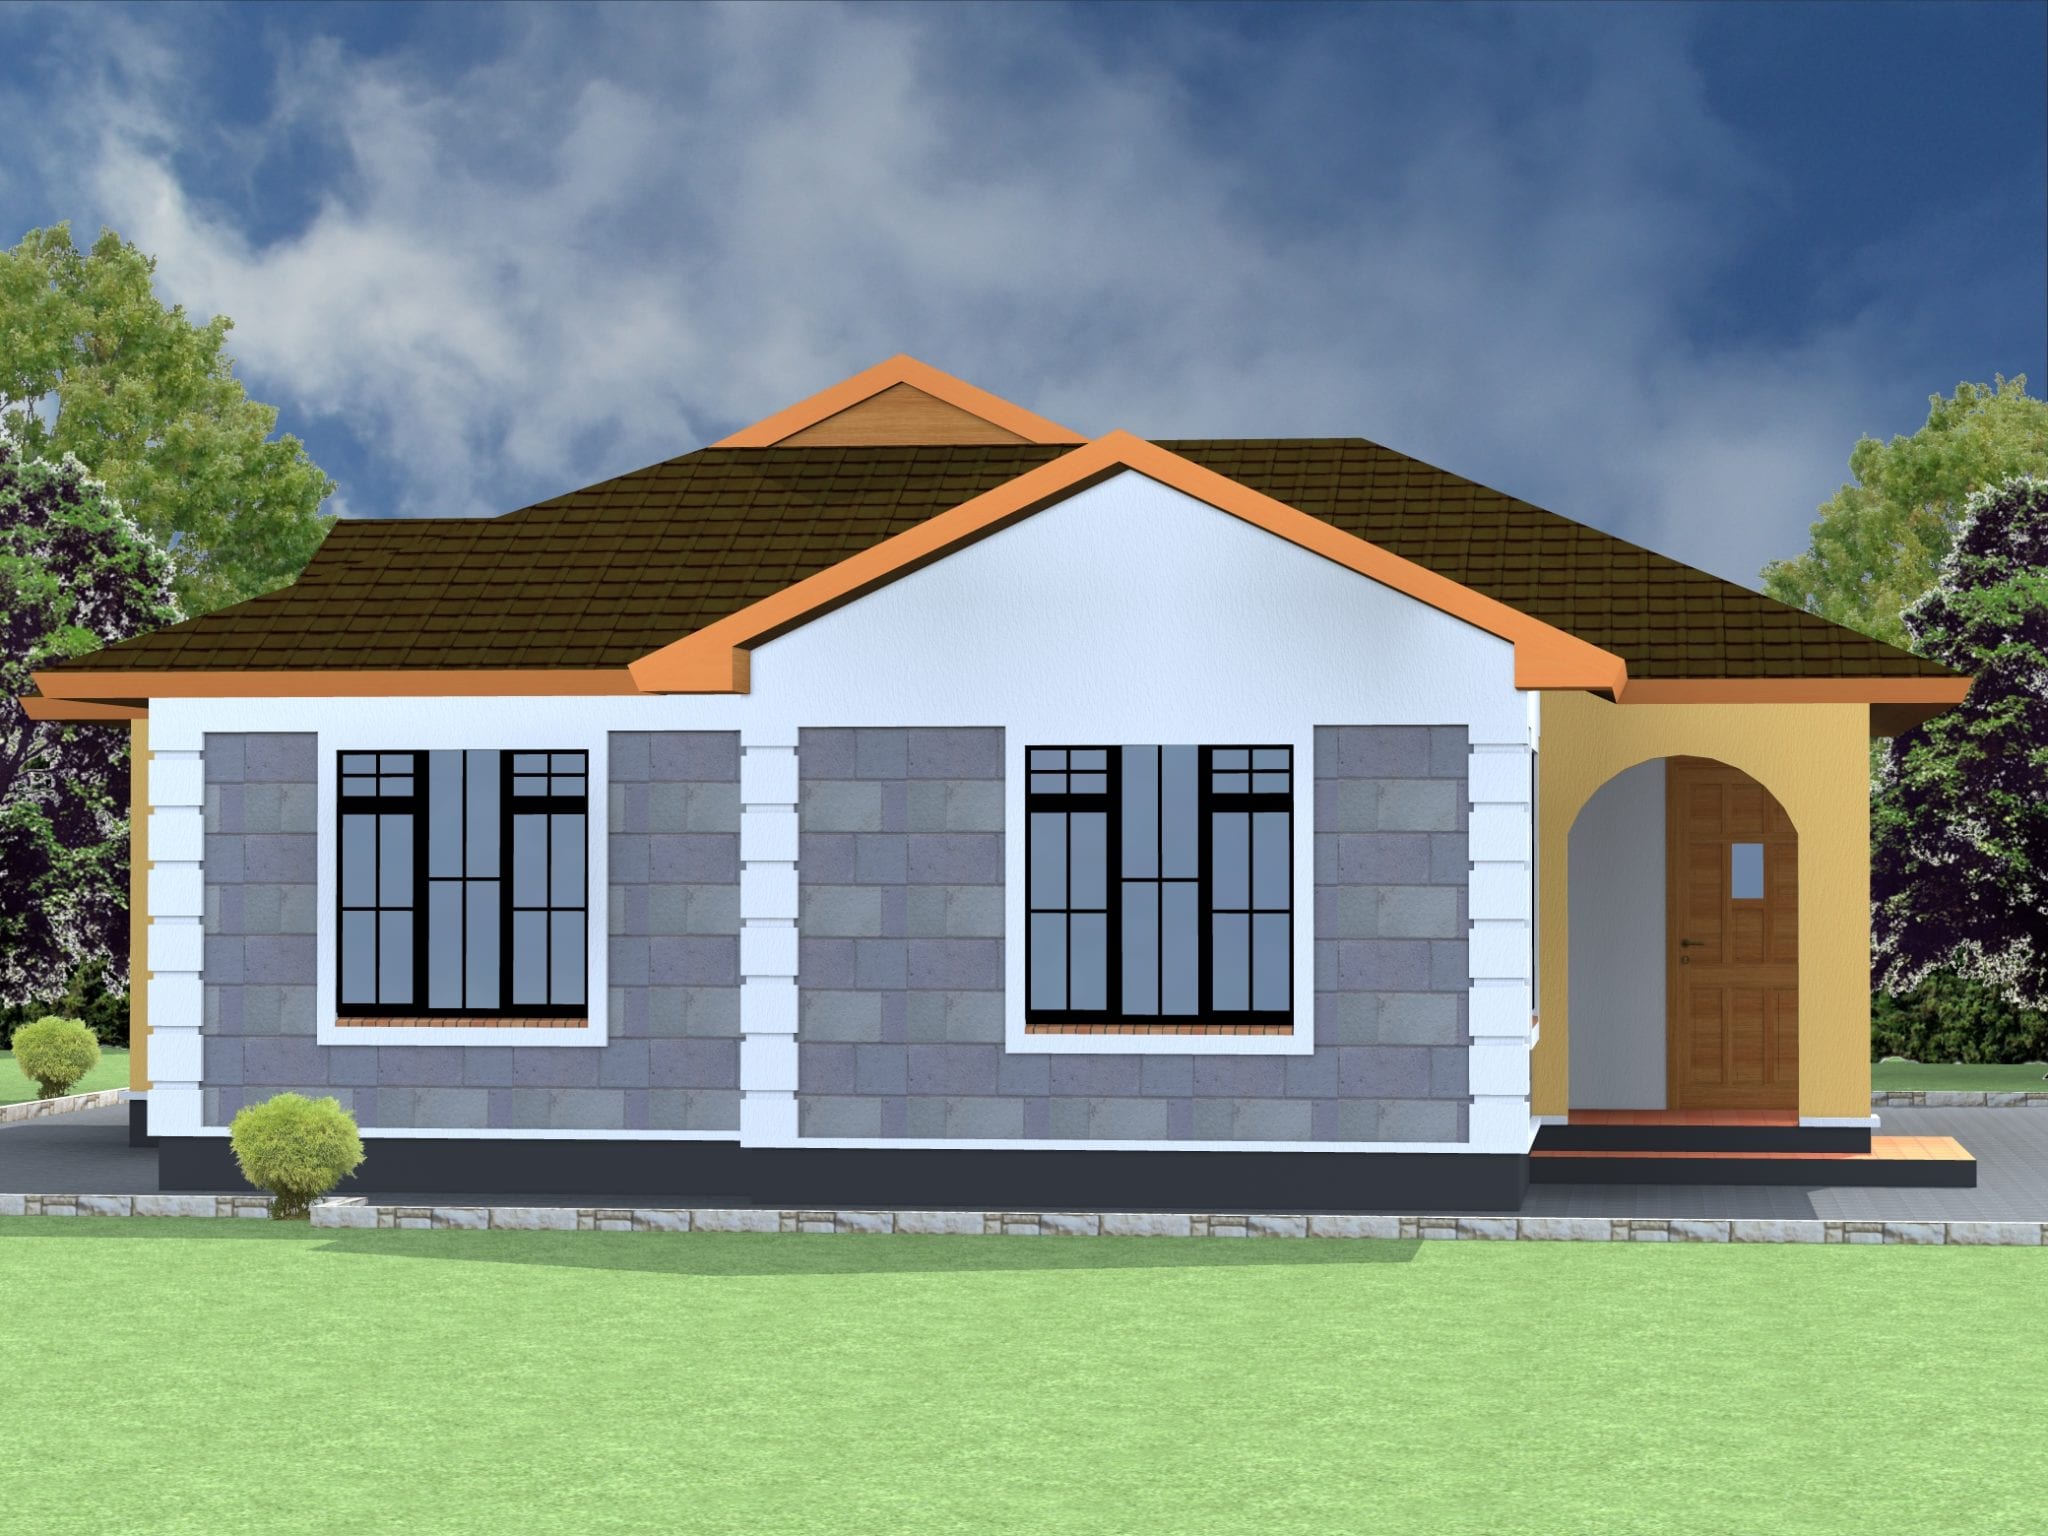  2  Bedroom  House  Plans  pdf Free  Download HPD Consult